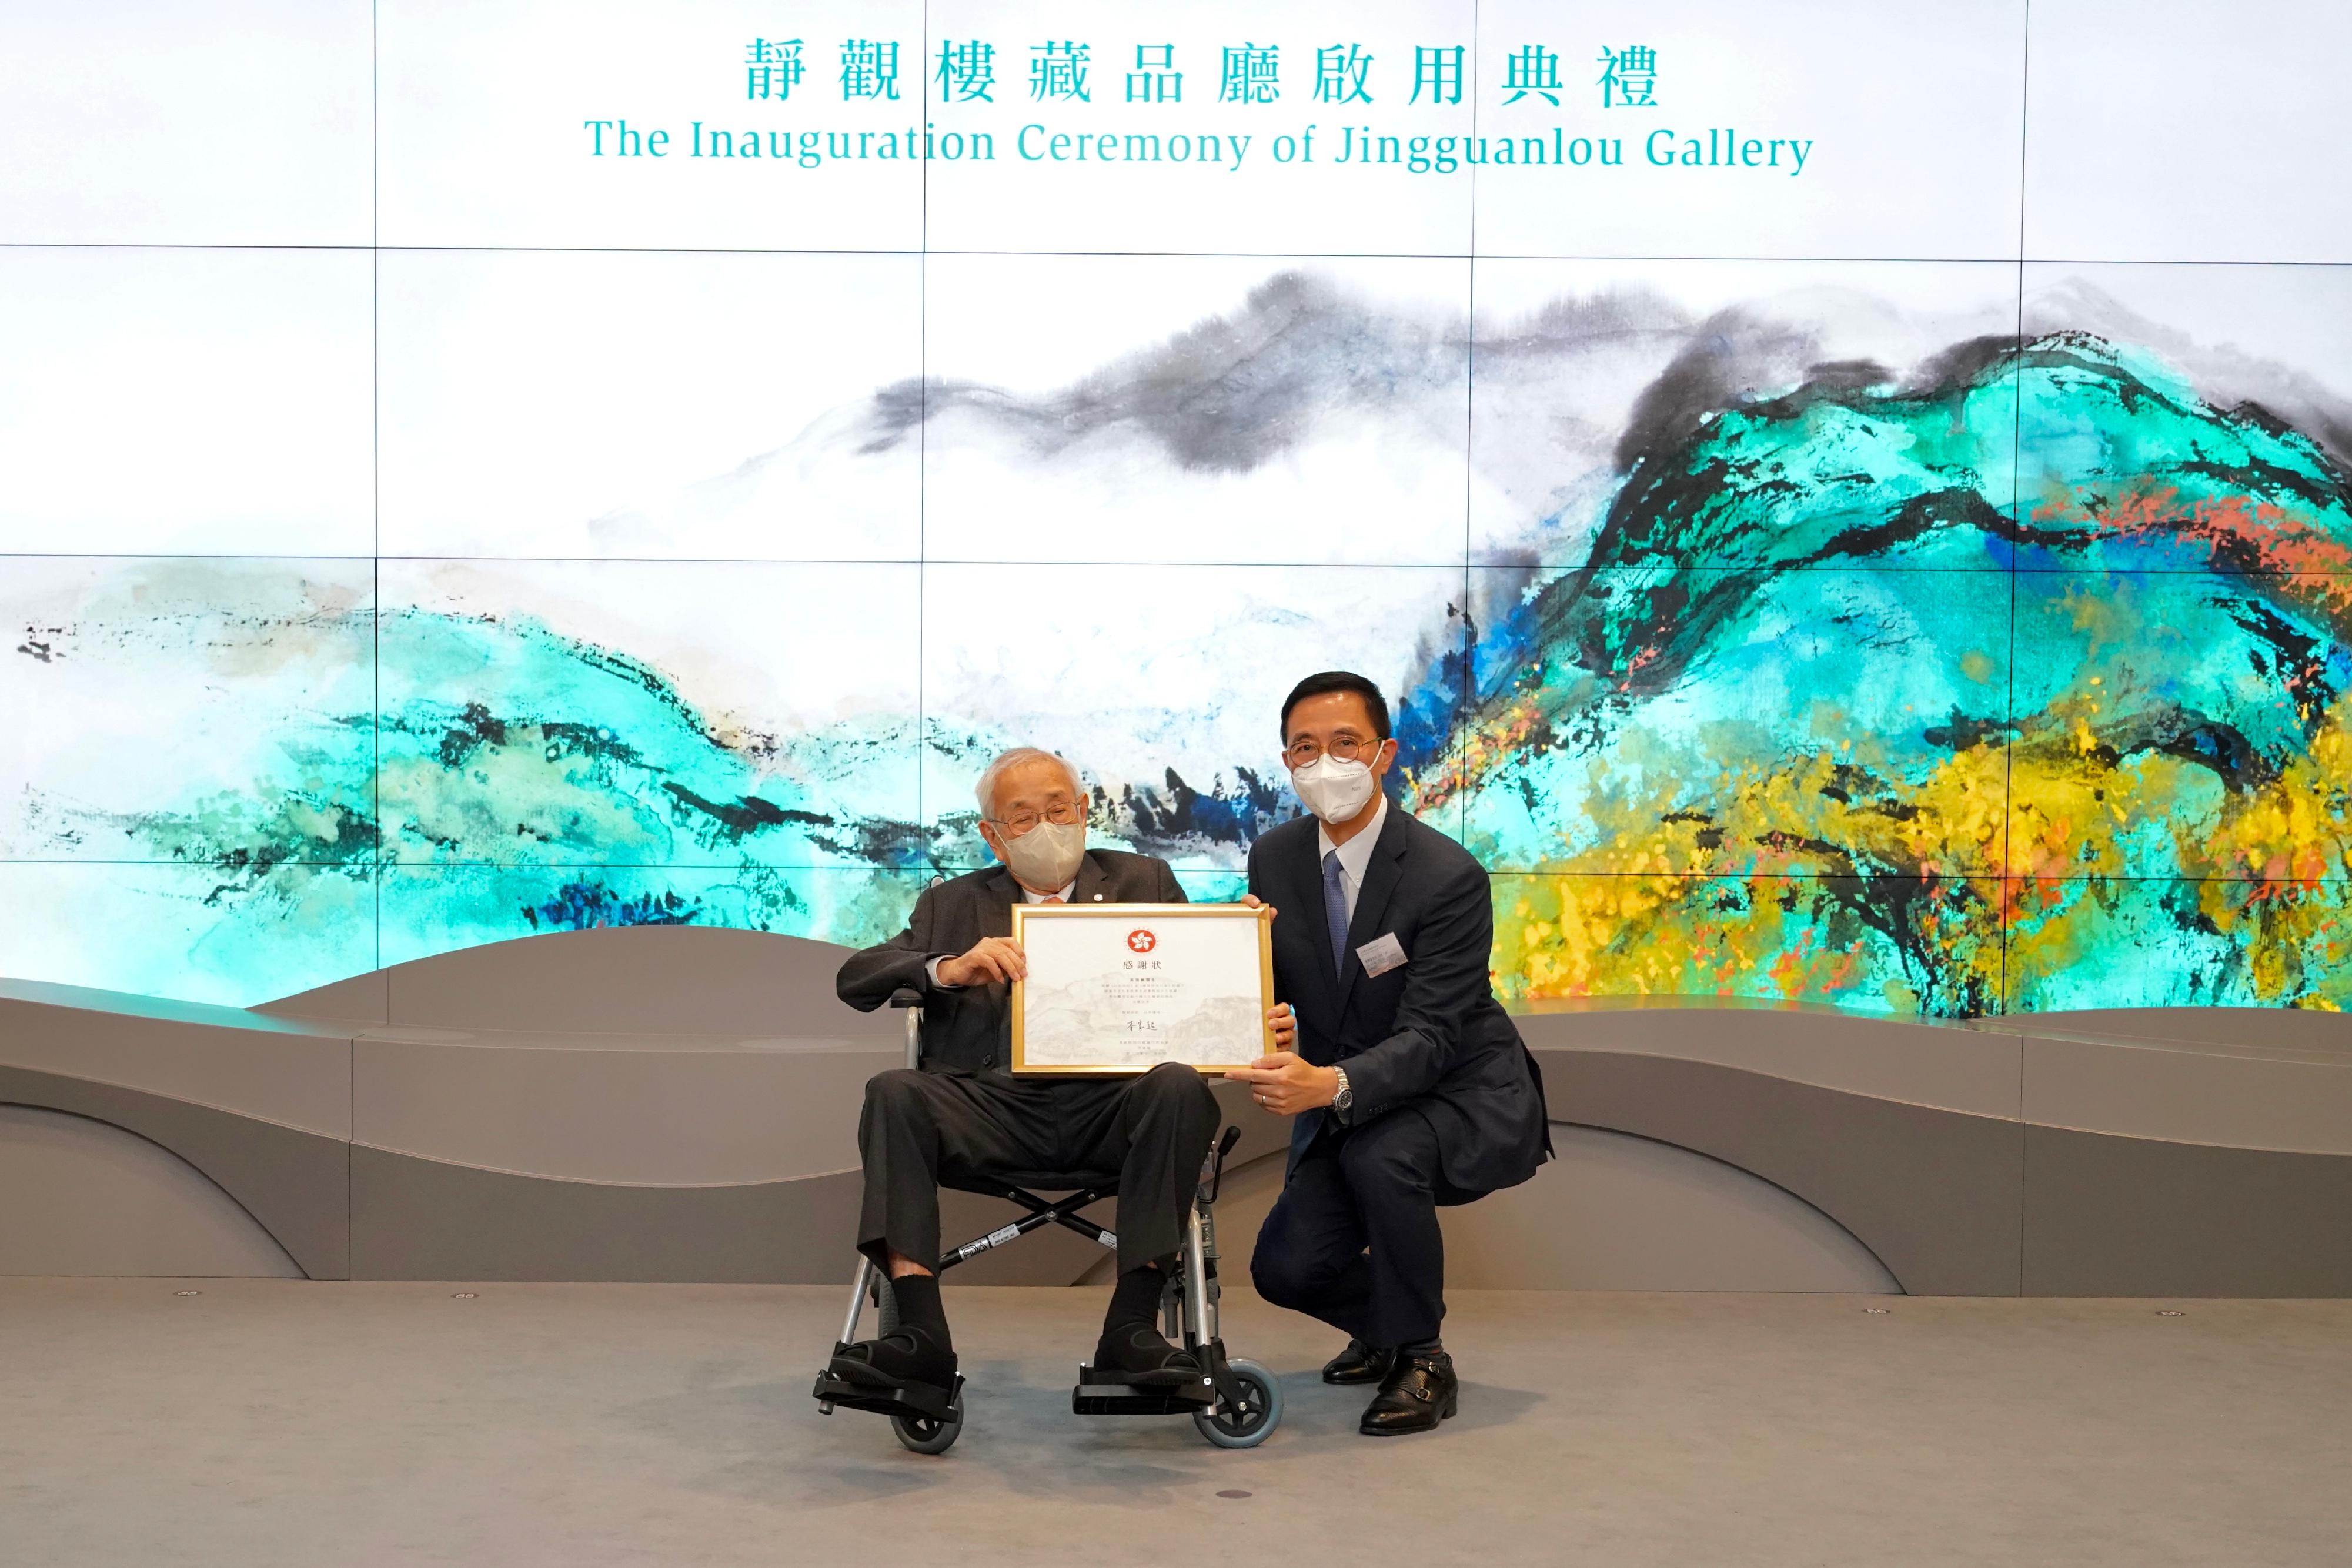 The Inauguration of Jingguanlou Gallery cum Celebration Ceremony of the HKMoA (Hong Kong Museum of Art) 60th Anniversary was held today (December 8). Photo shows the Secretary for Culture, Sports and Tourism, Mr Kevin Yeung (right), presenting a certificate of appreciation to the Founder of the Jingguanlou collection, Dr Leo Wong (left). 